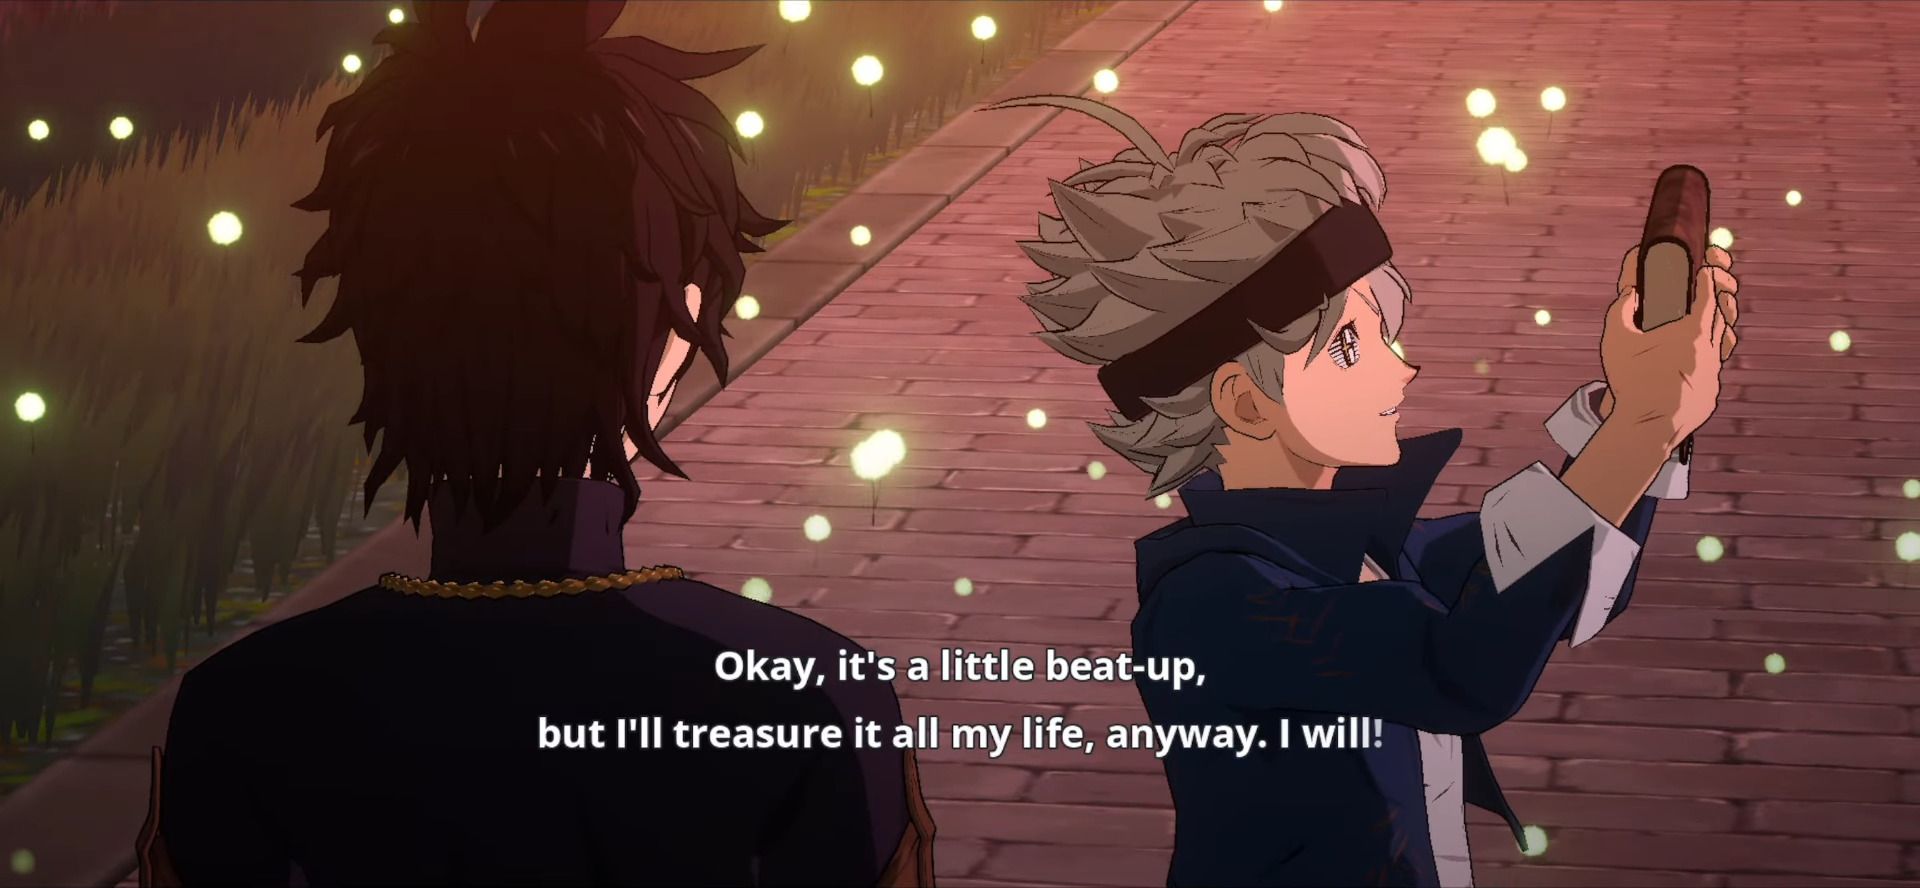 Black Clover M - Android game screenshots.